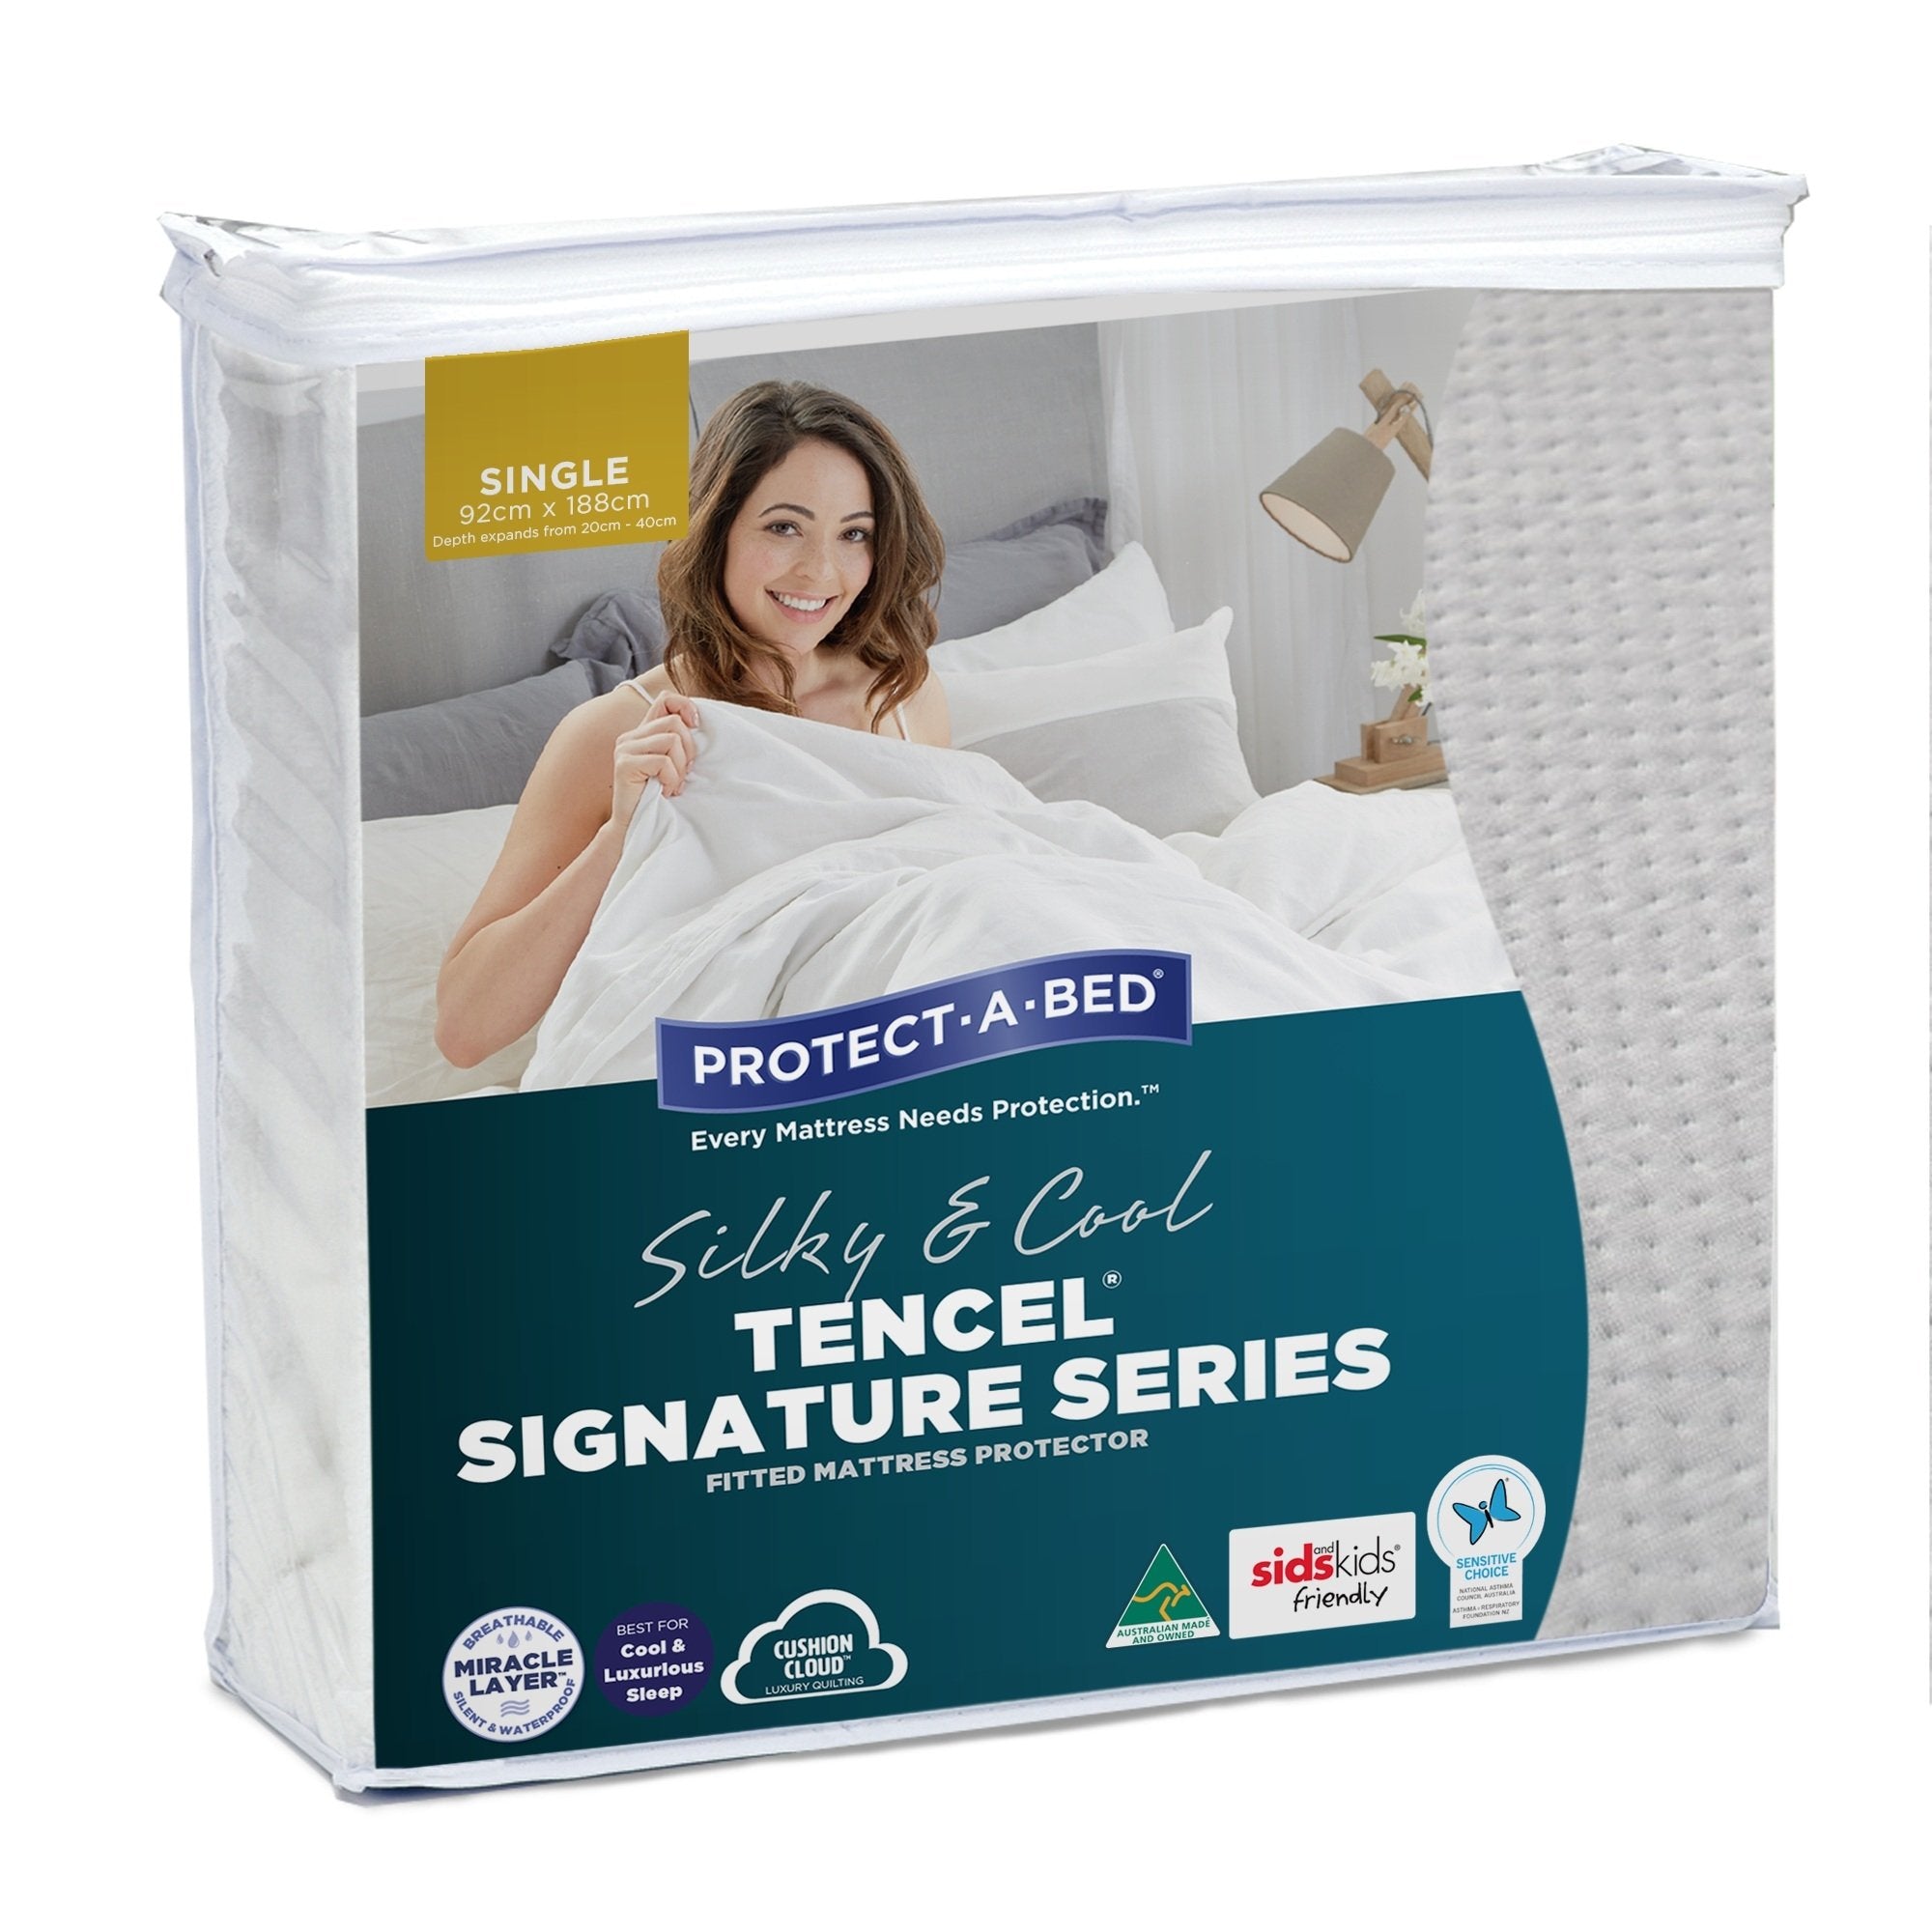 Protect-A-Bed Signature Mattress Protector - Mattress & Pillow ScienceProtection